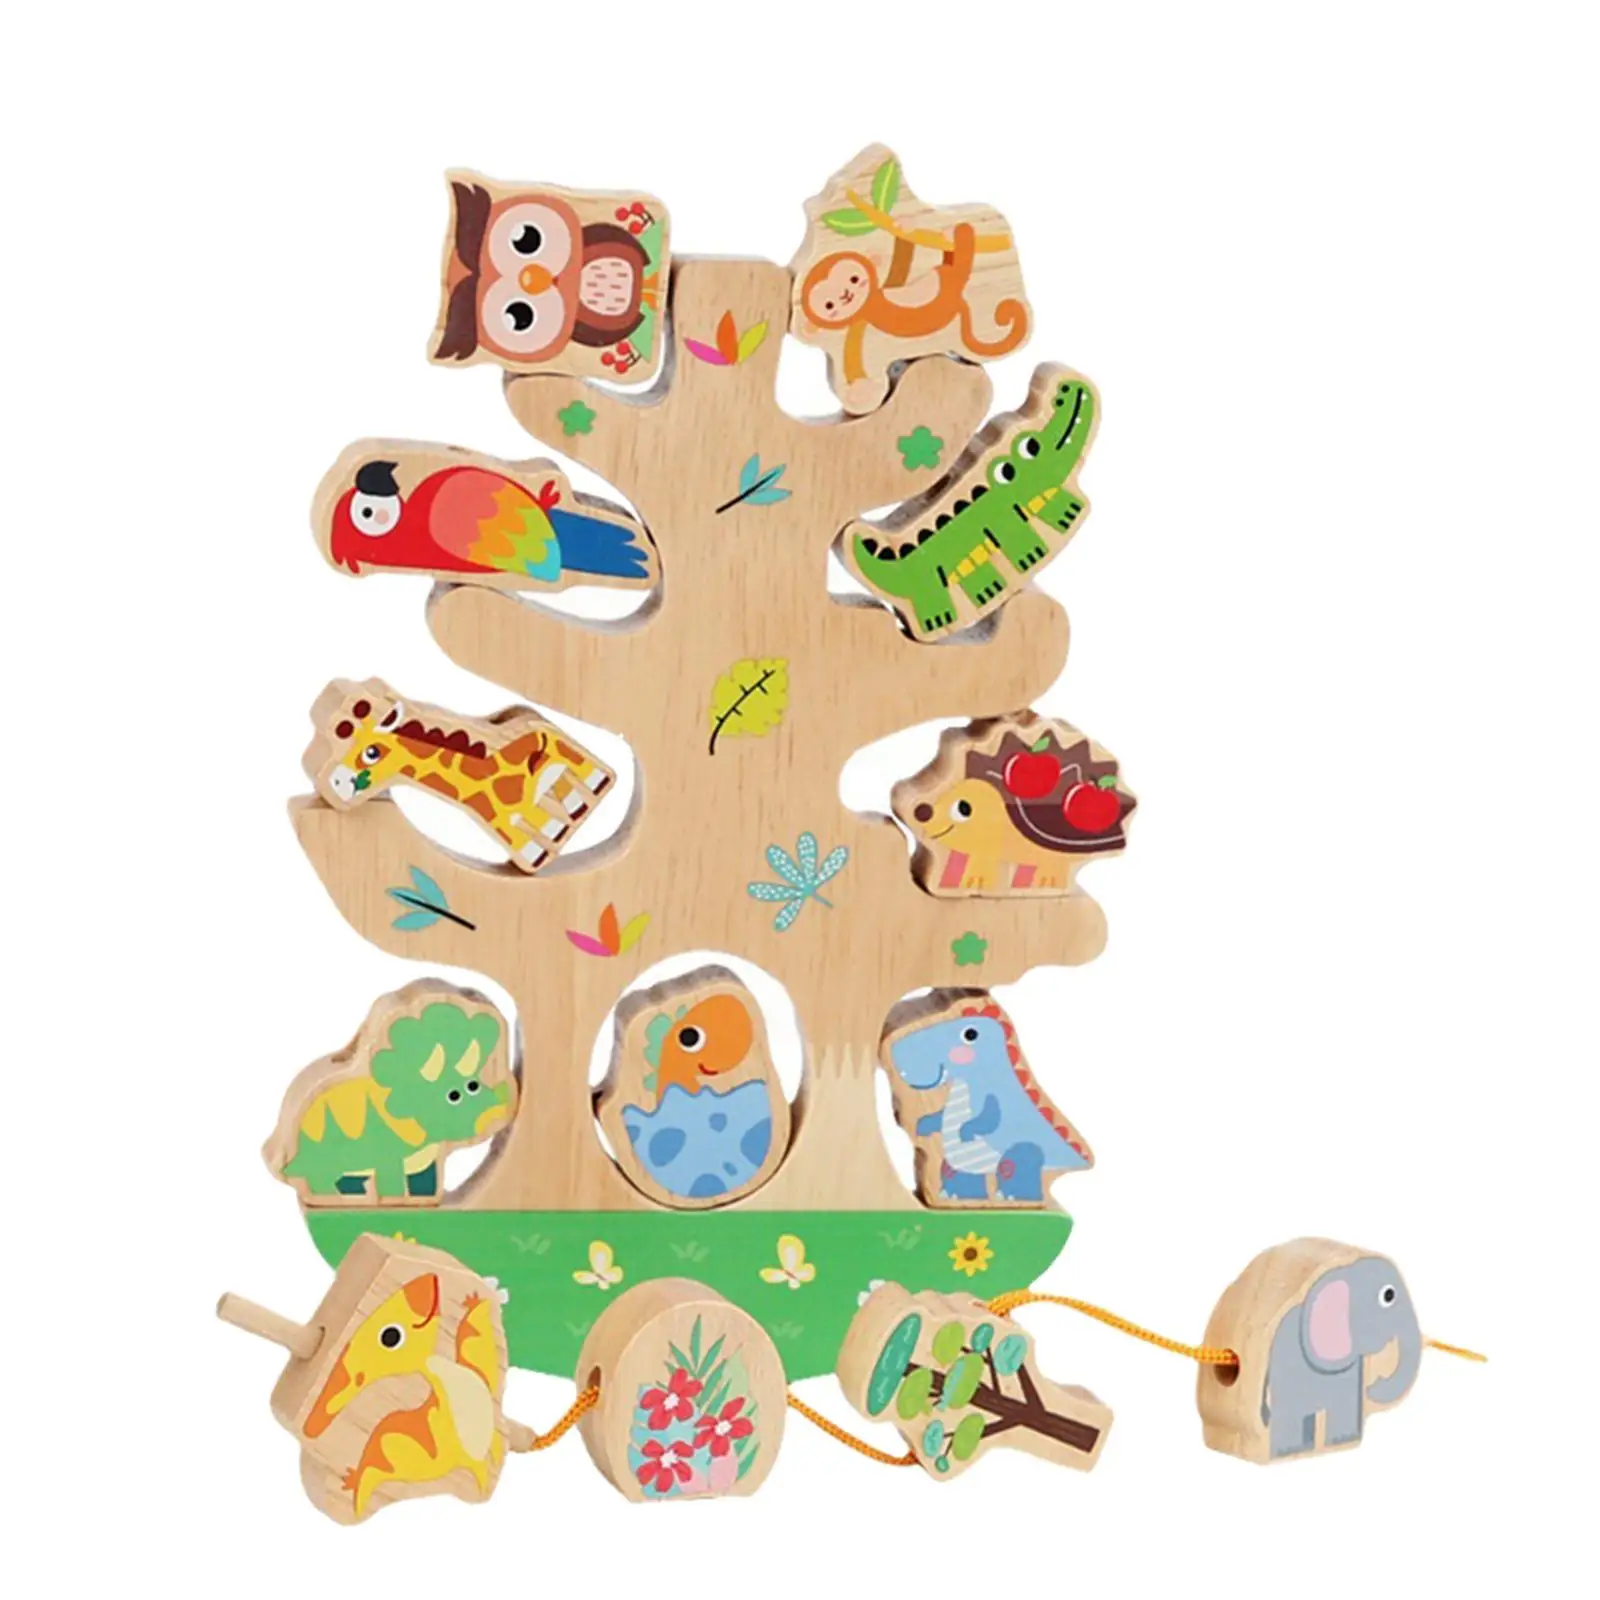 Wooden Animal Stacking Toys Puzzle Early Learning Gifts Threading Toys for Festival Birthday New Year Kids Children Preschool